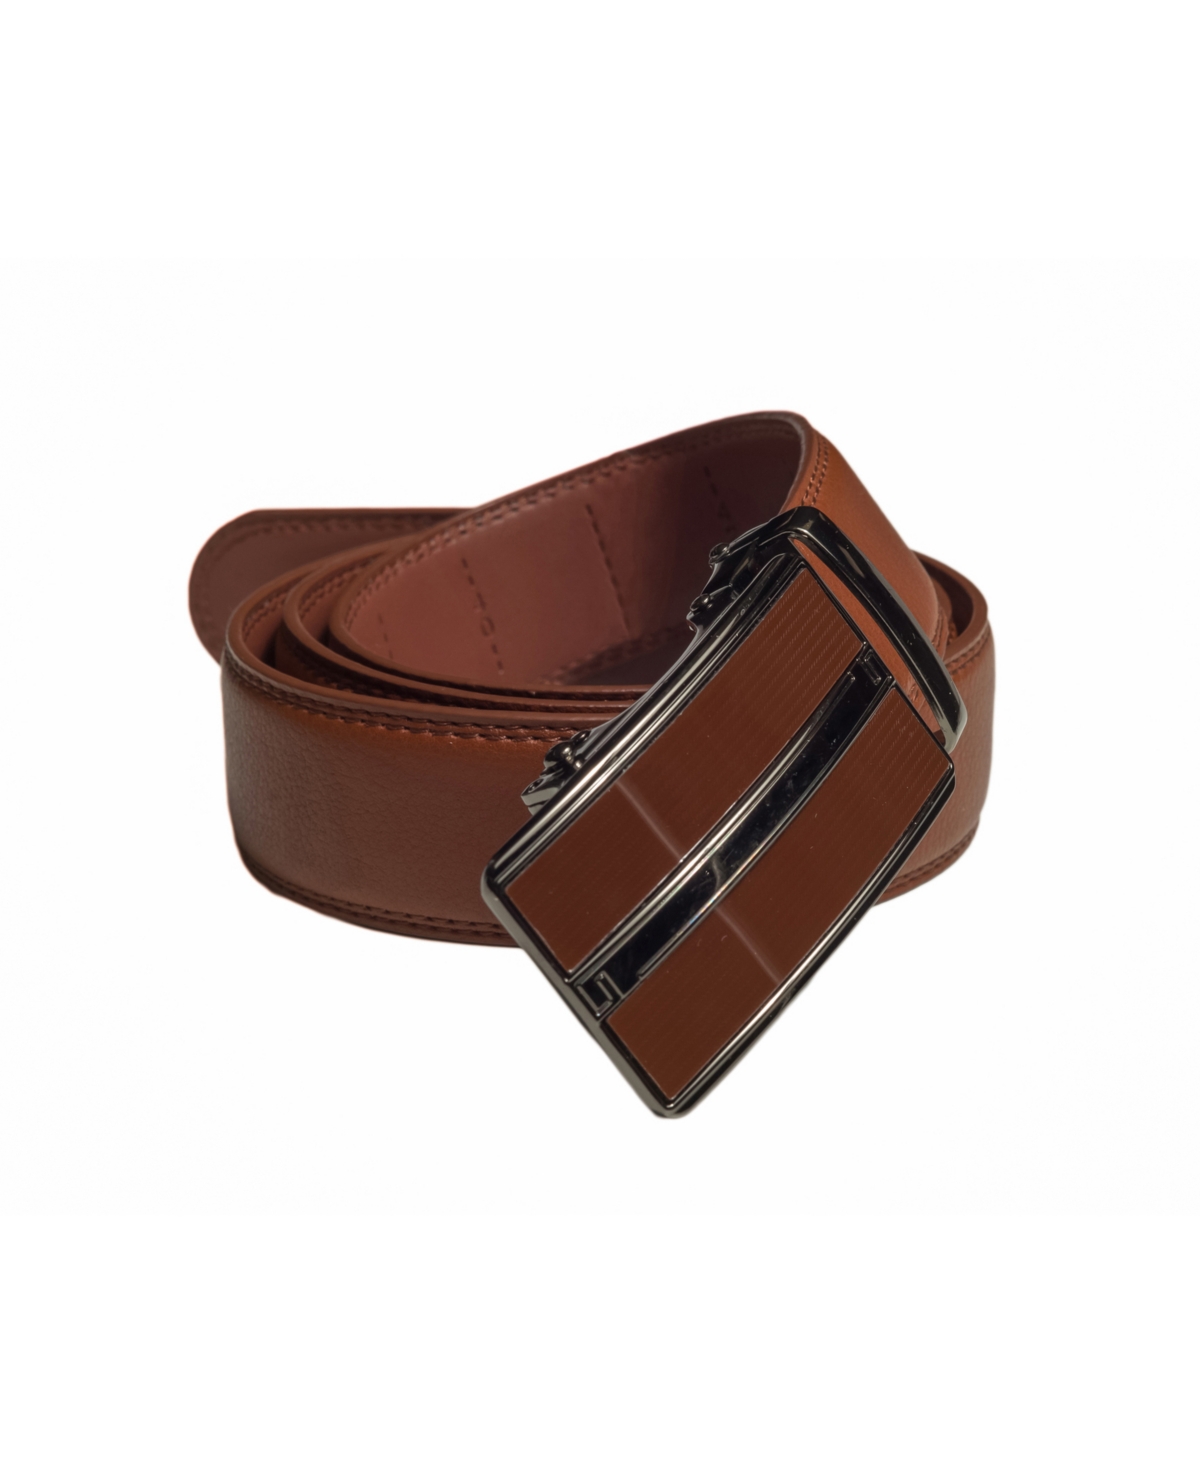 Automatic and Adjustable Belt - Tan